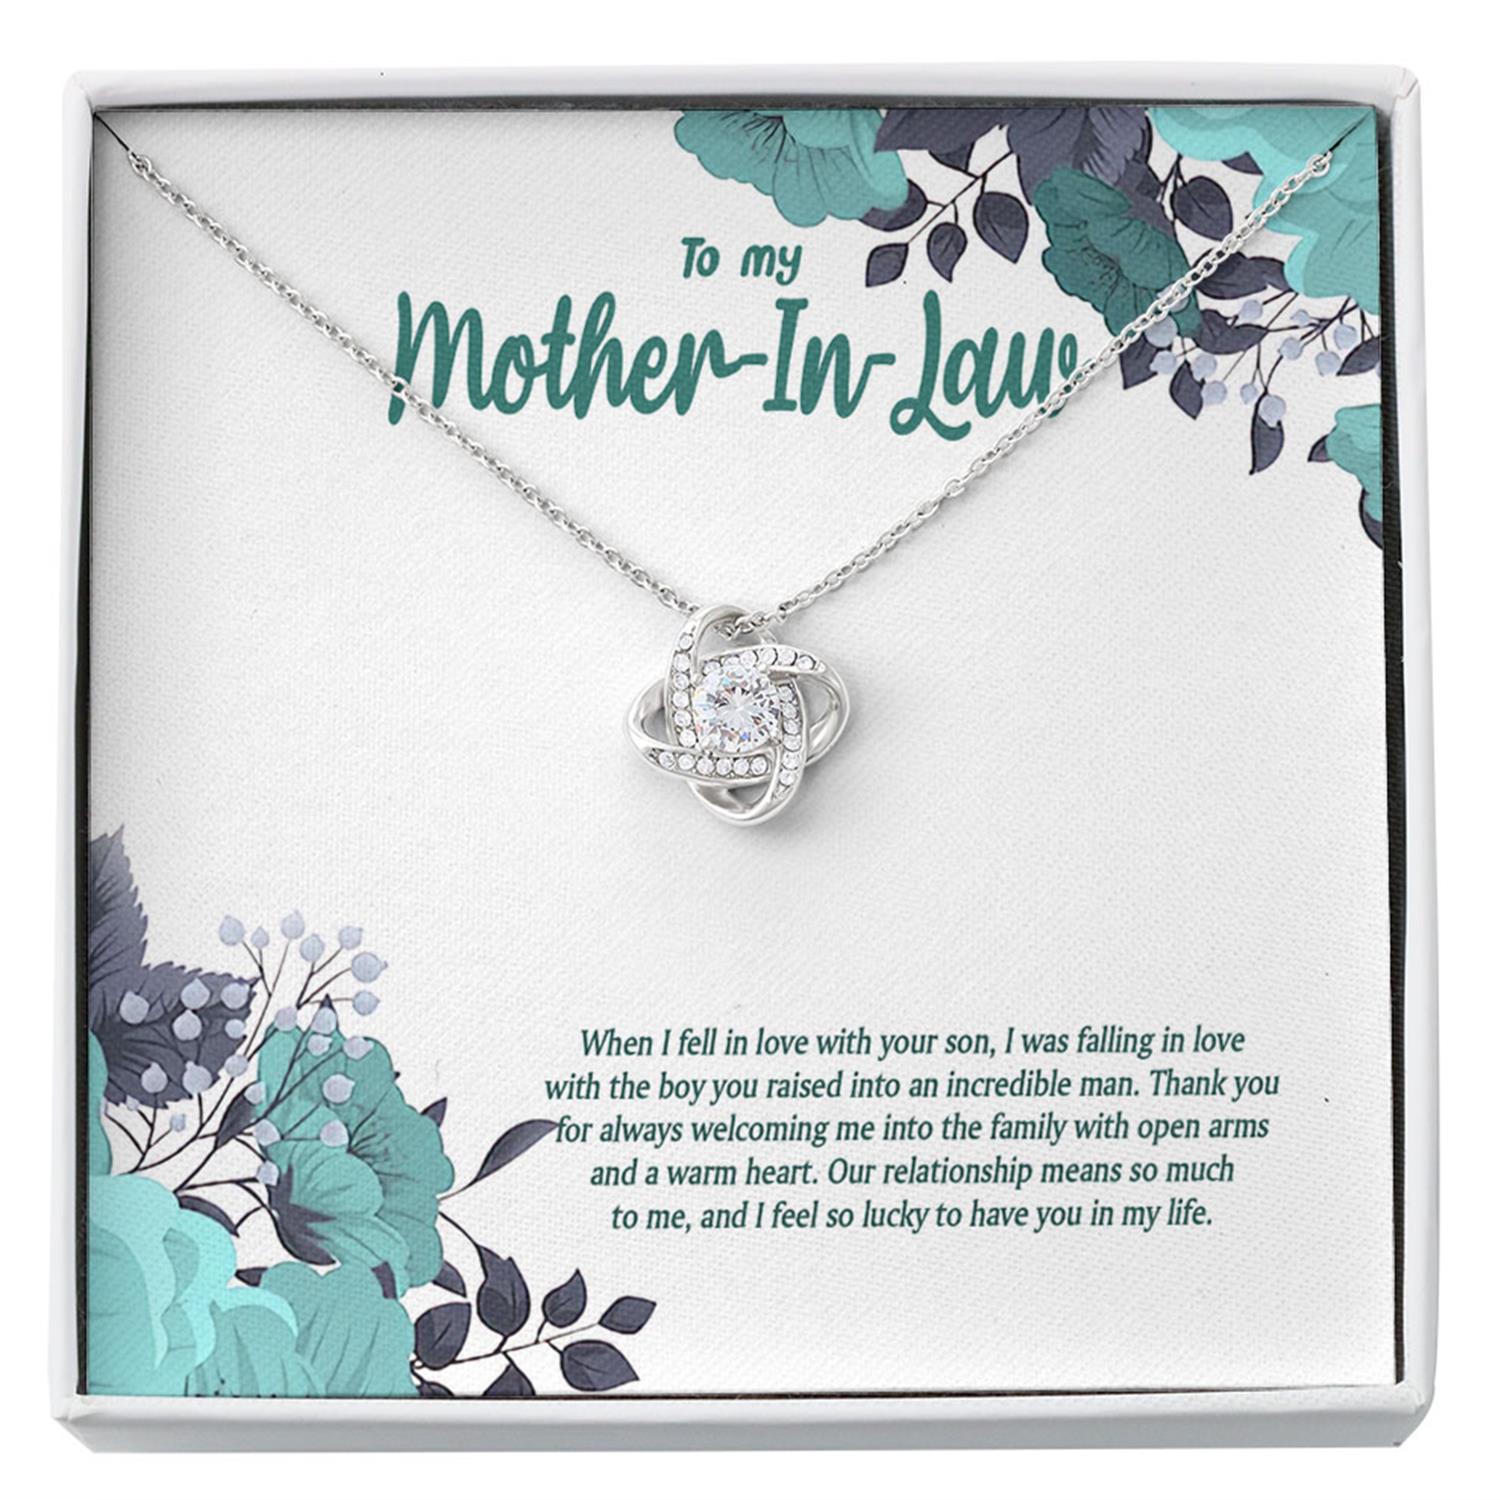 Mother-in-law Necklace, To My Mother-in-law Necklace, Gift For Mother-in-law Thank You Custom Necklace